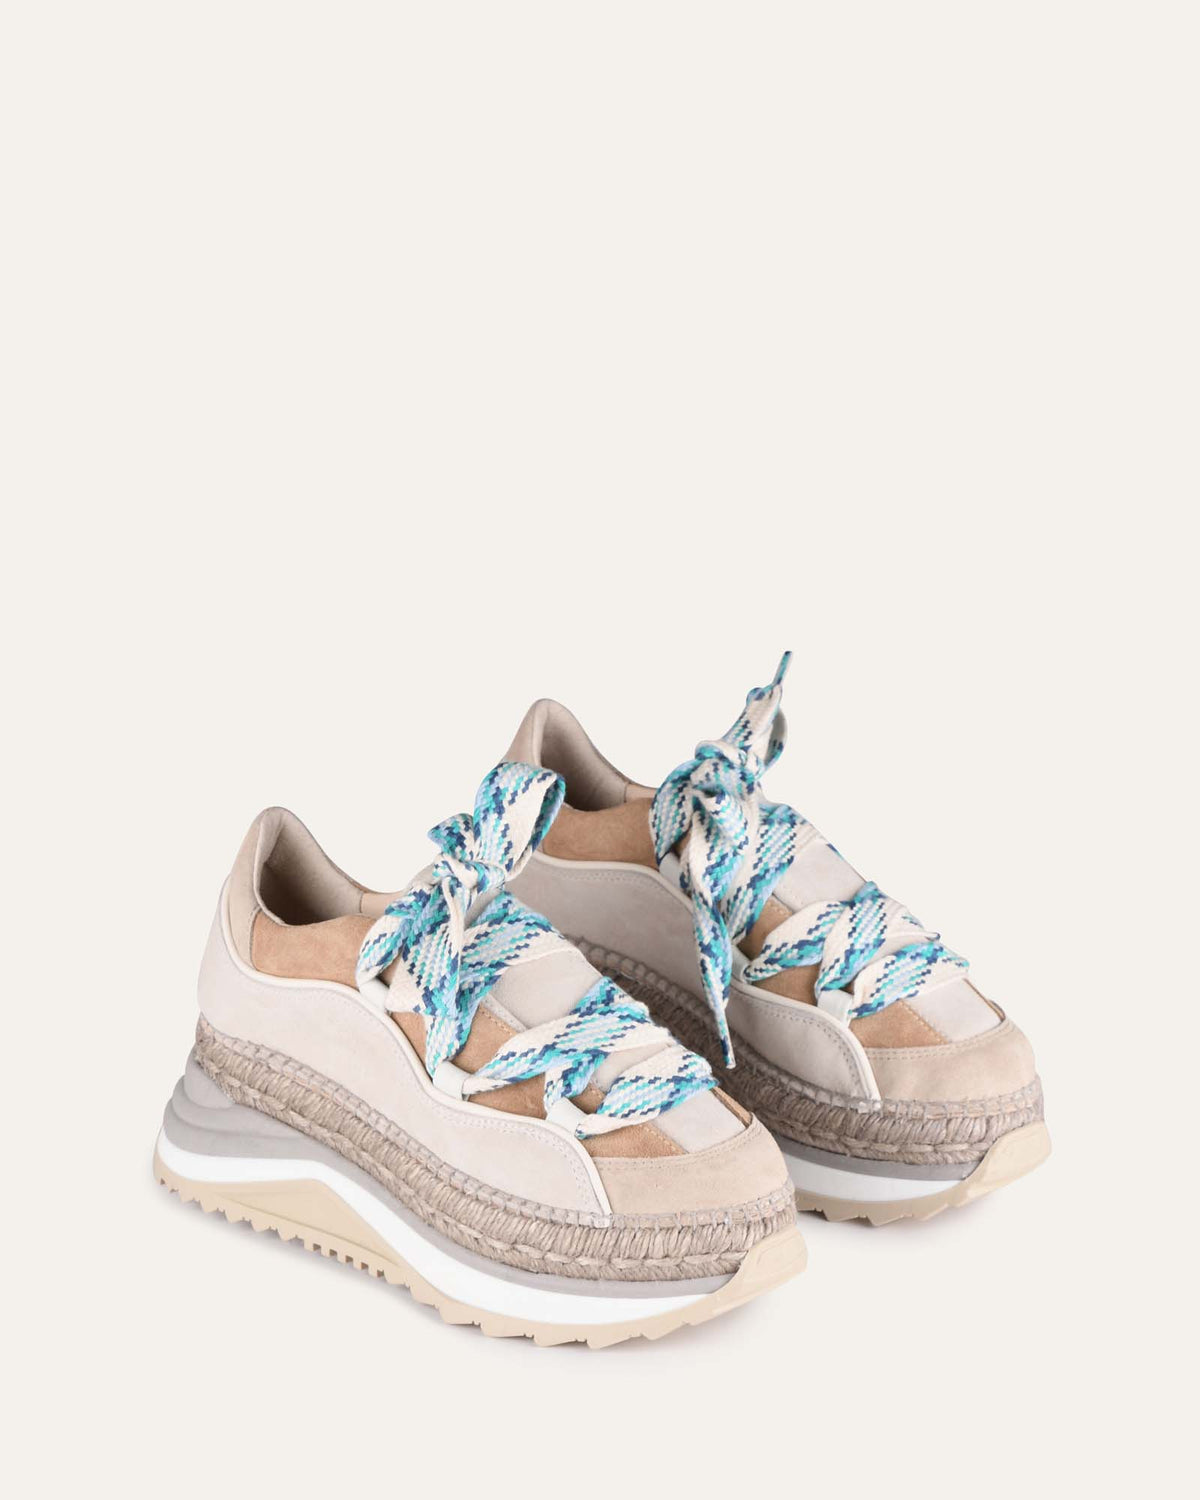 ADELA SNEAKERS TAUPE MULTI SUEDE